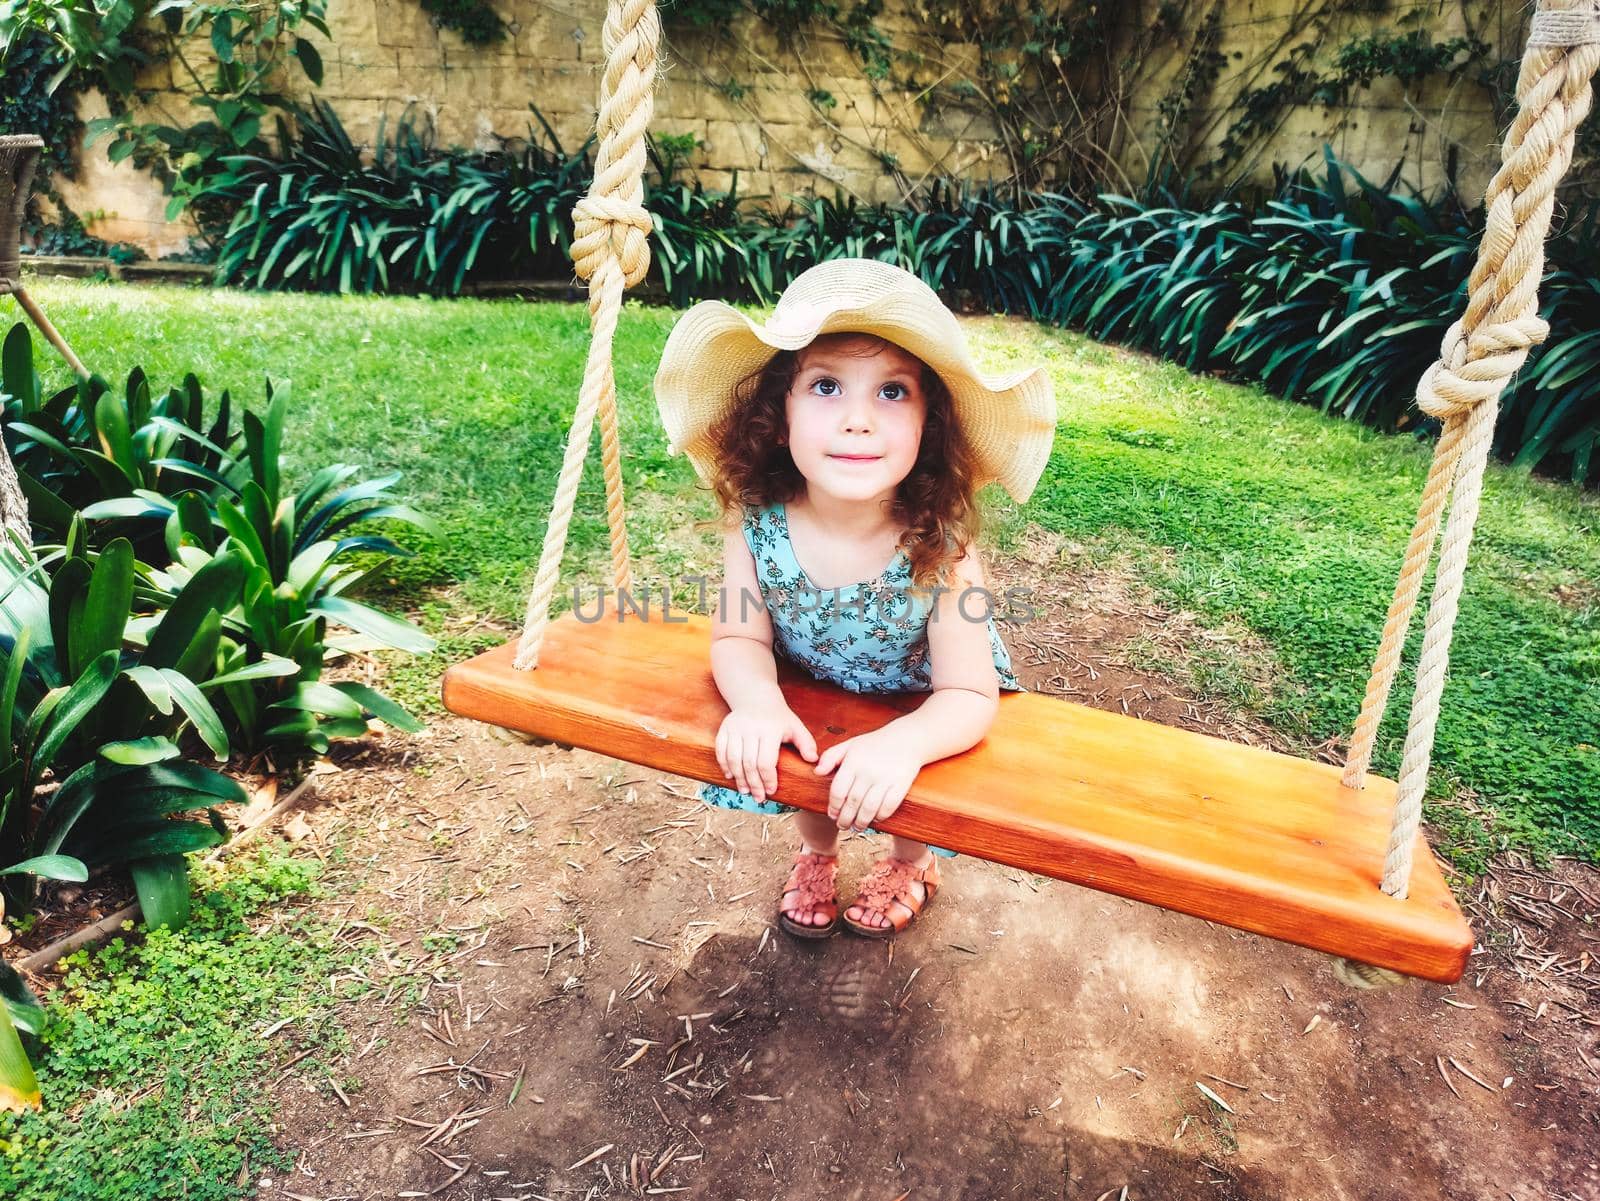 Cute little girl playing on a wooden swing wearing a big summer hat